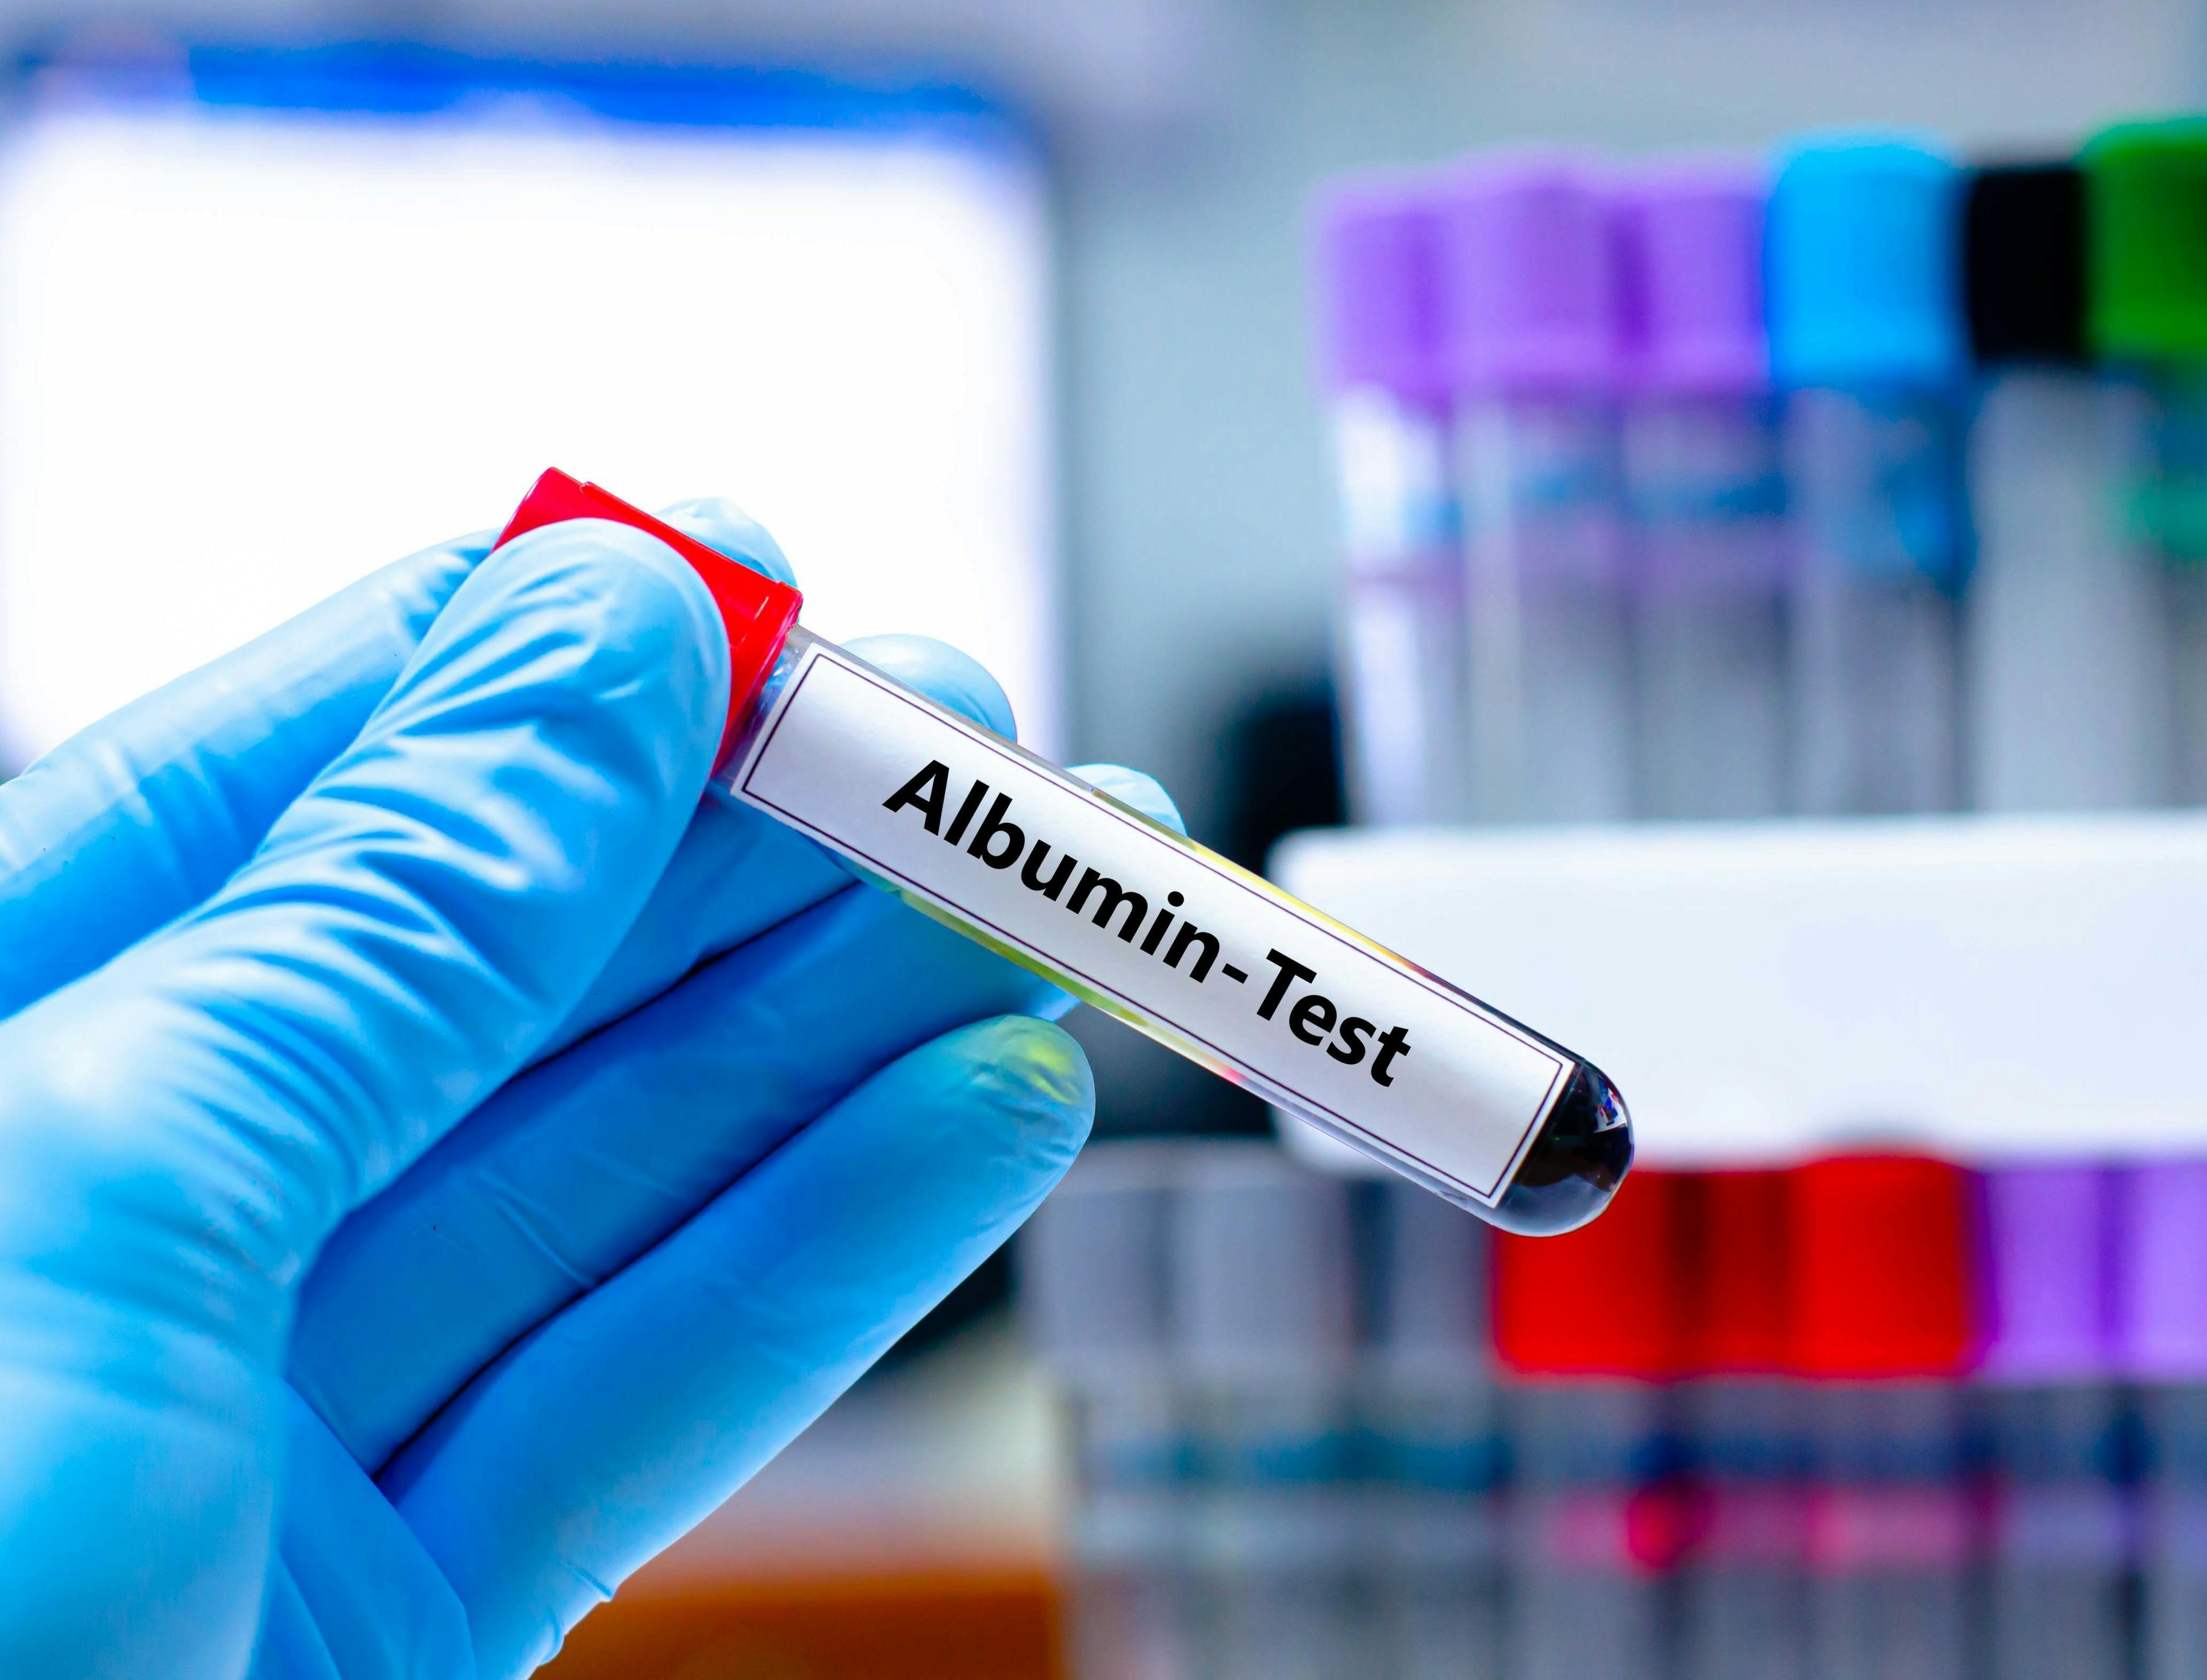 Albumin is the most abundant protein in the blood | Image Credit: kitsawet - stock.adobe.com